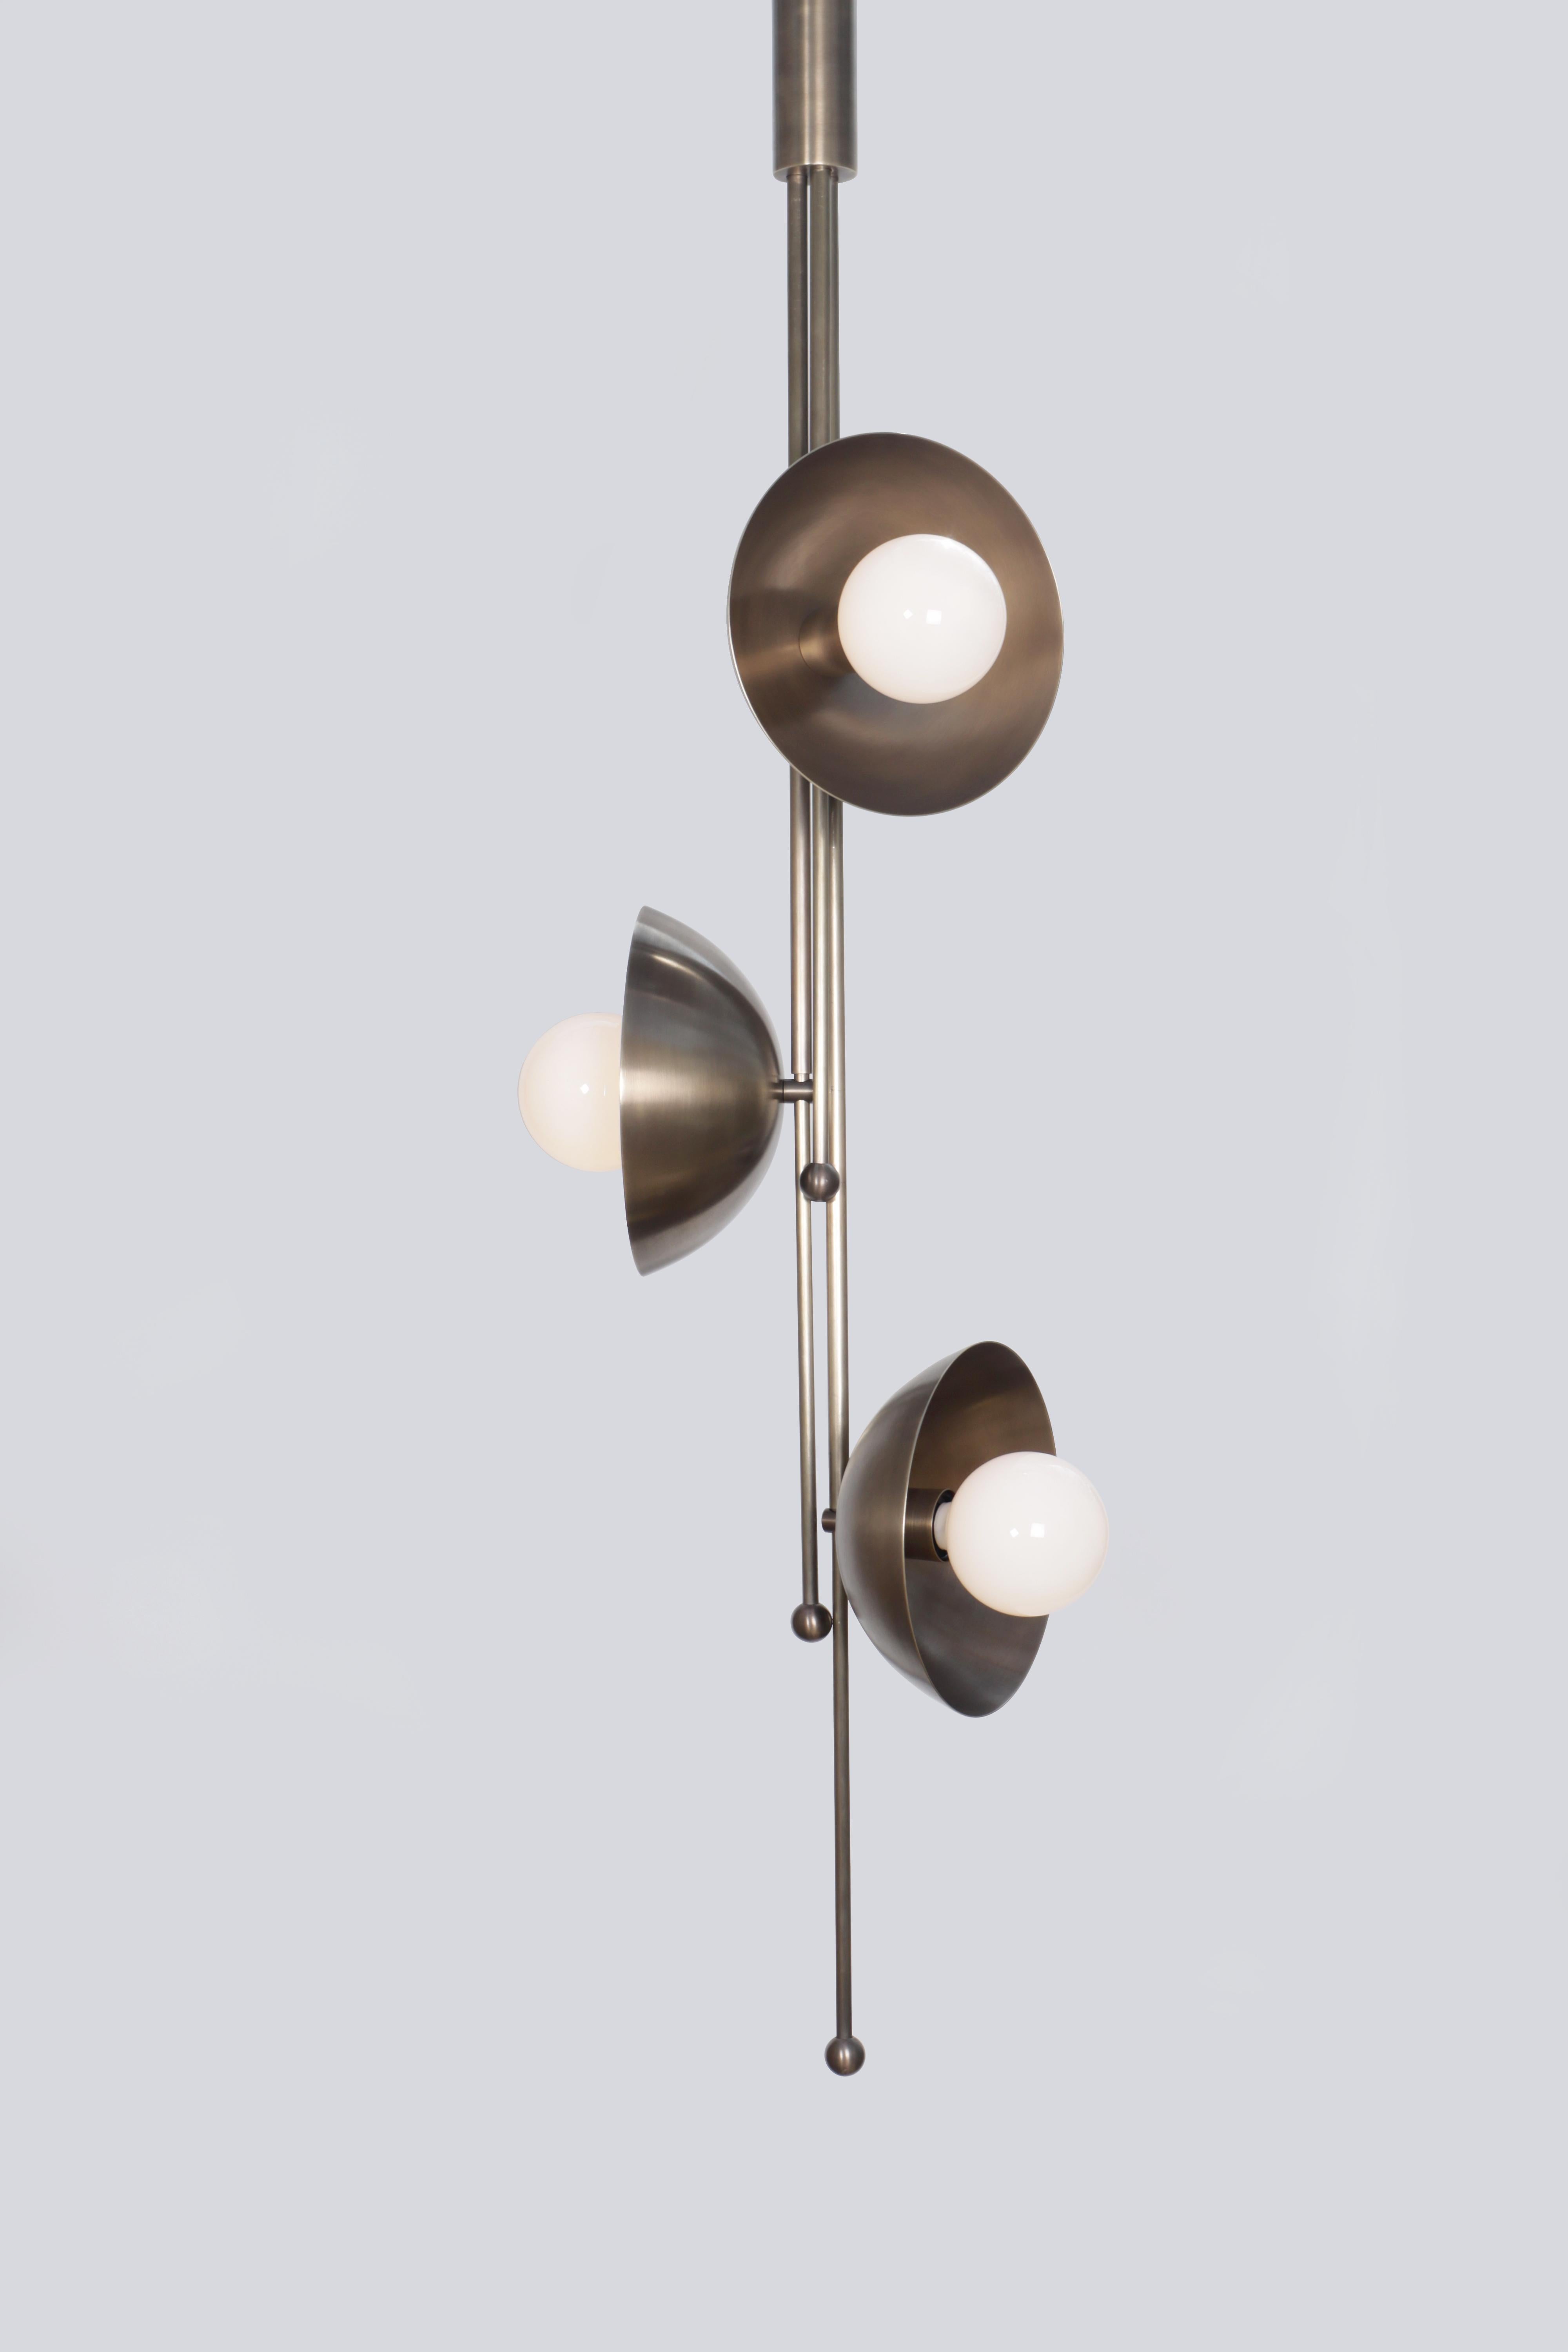 Drop 3 Brass Dome Pendant Lamp by Lamp Shaper
Dimensions: D 43 x W 43 x H 140 cm.
Materials: Brass.

Different finishes available: raw brass, aged brass, burnt brass and brushed brass Please contact us.

All our lamps can be wired according to each